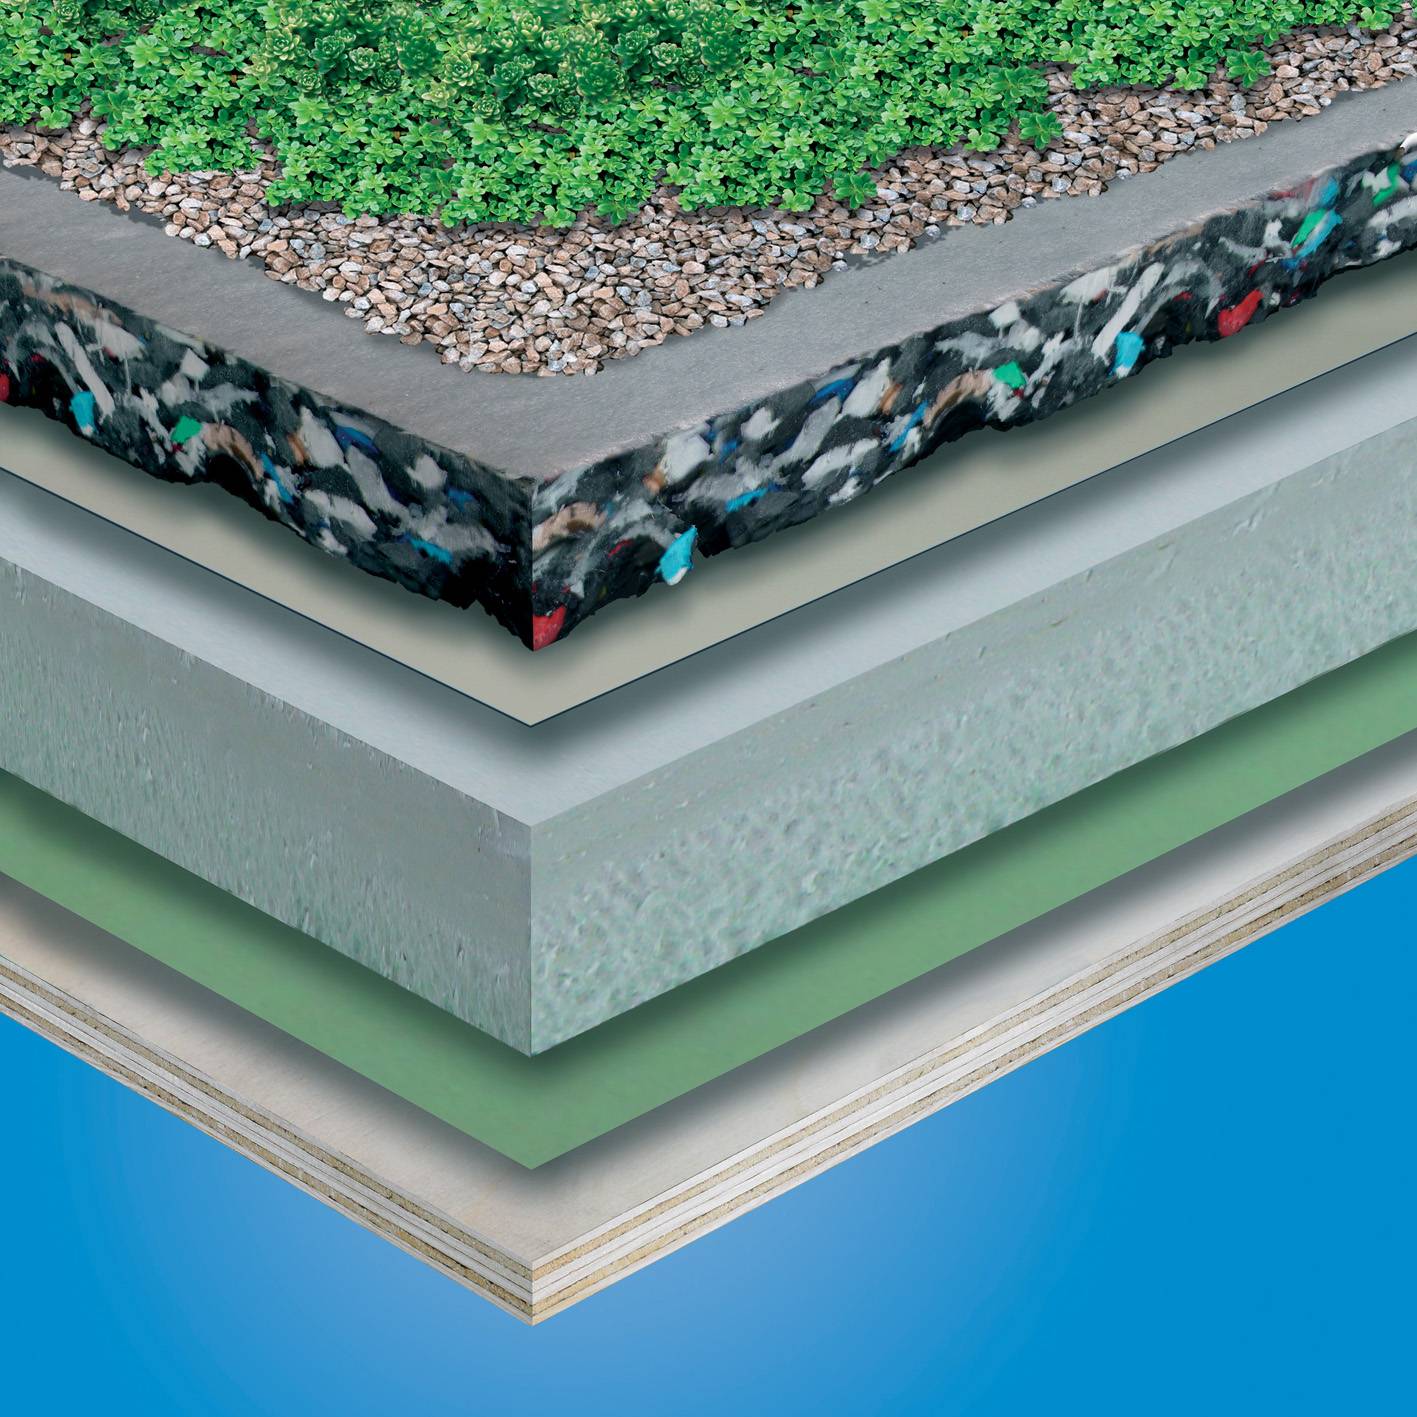 TG66 Green Roof System - Recycled High Density Polyethylene Drainage Board